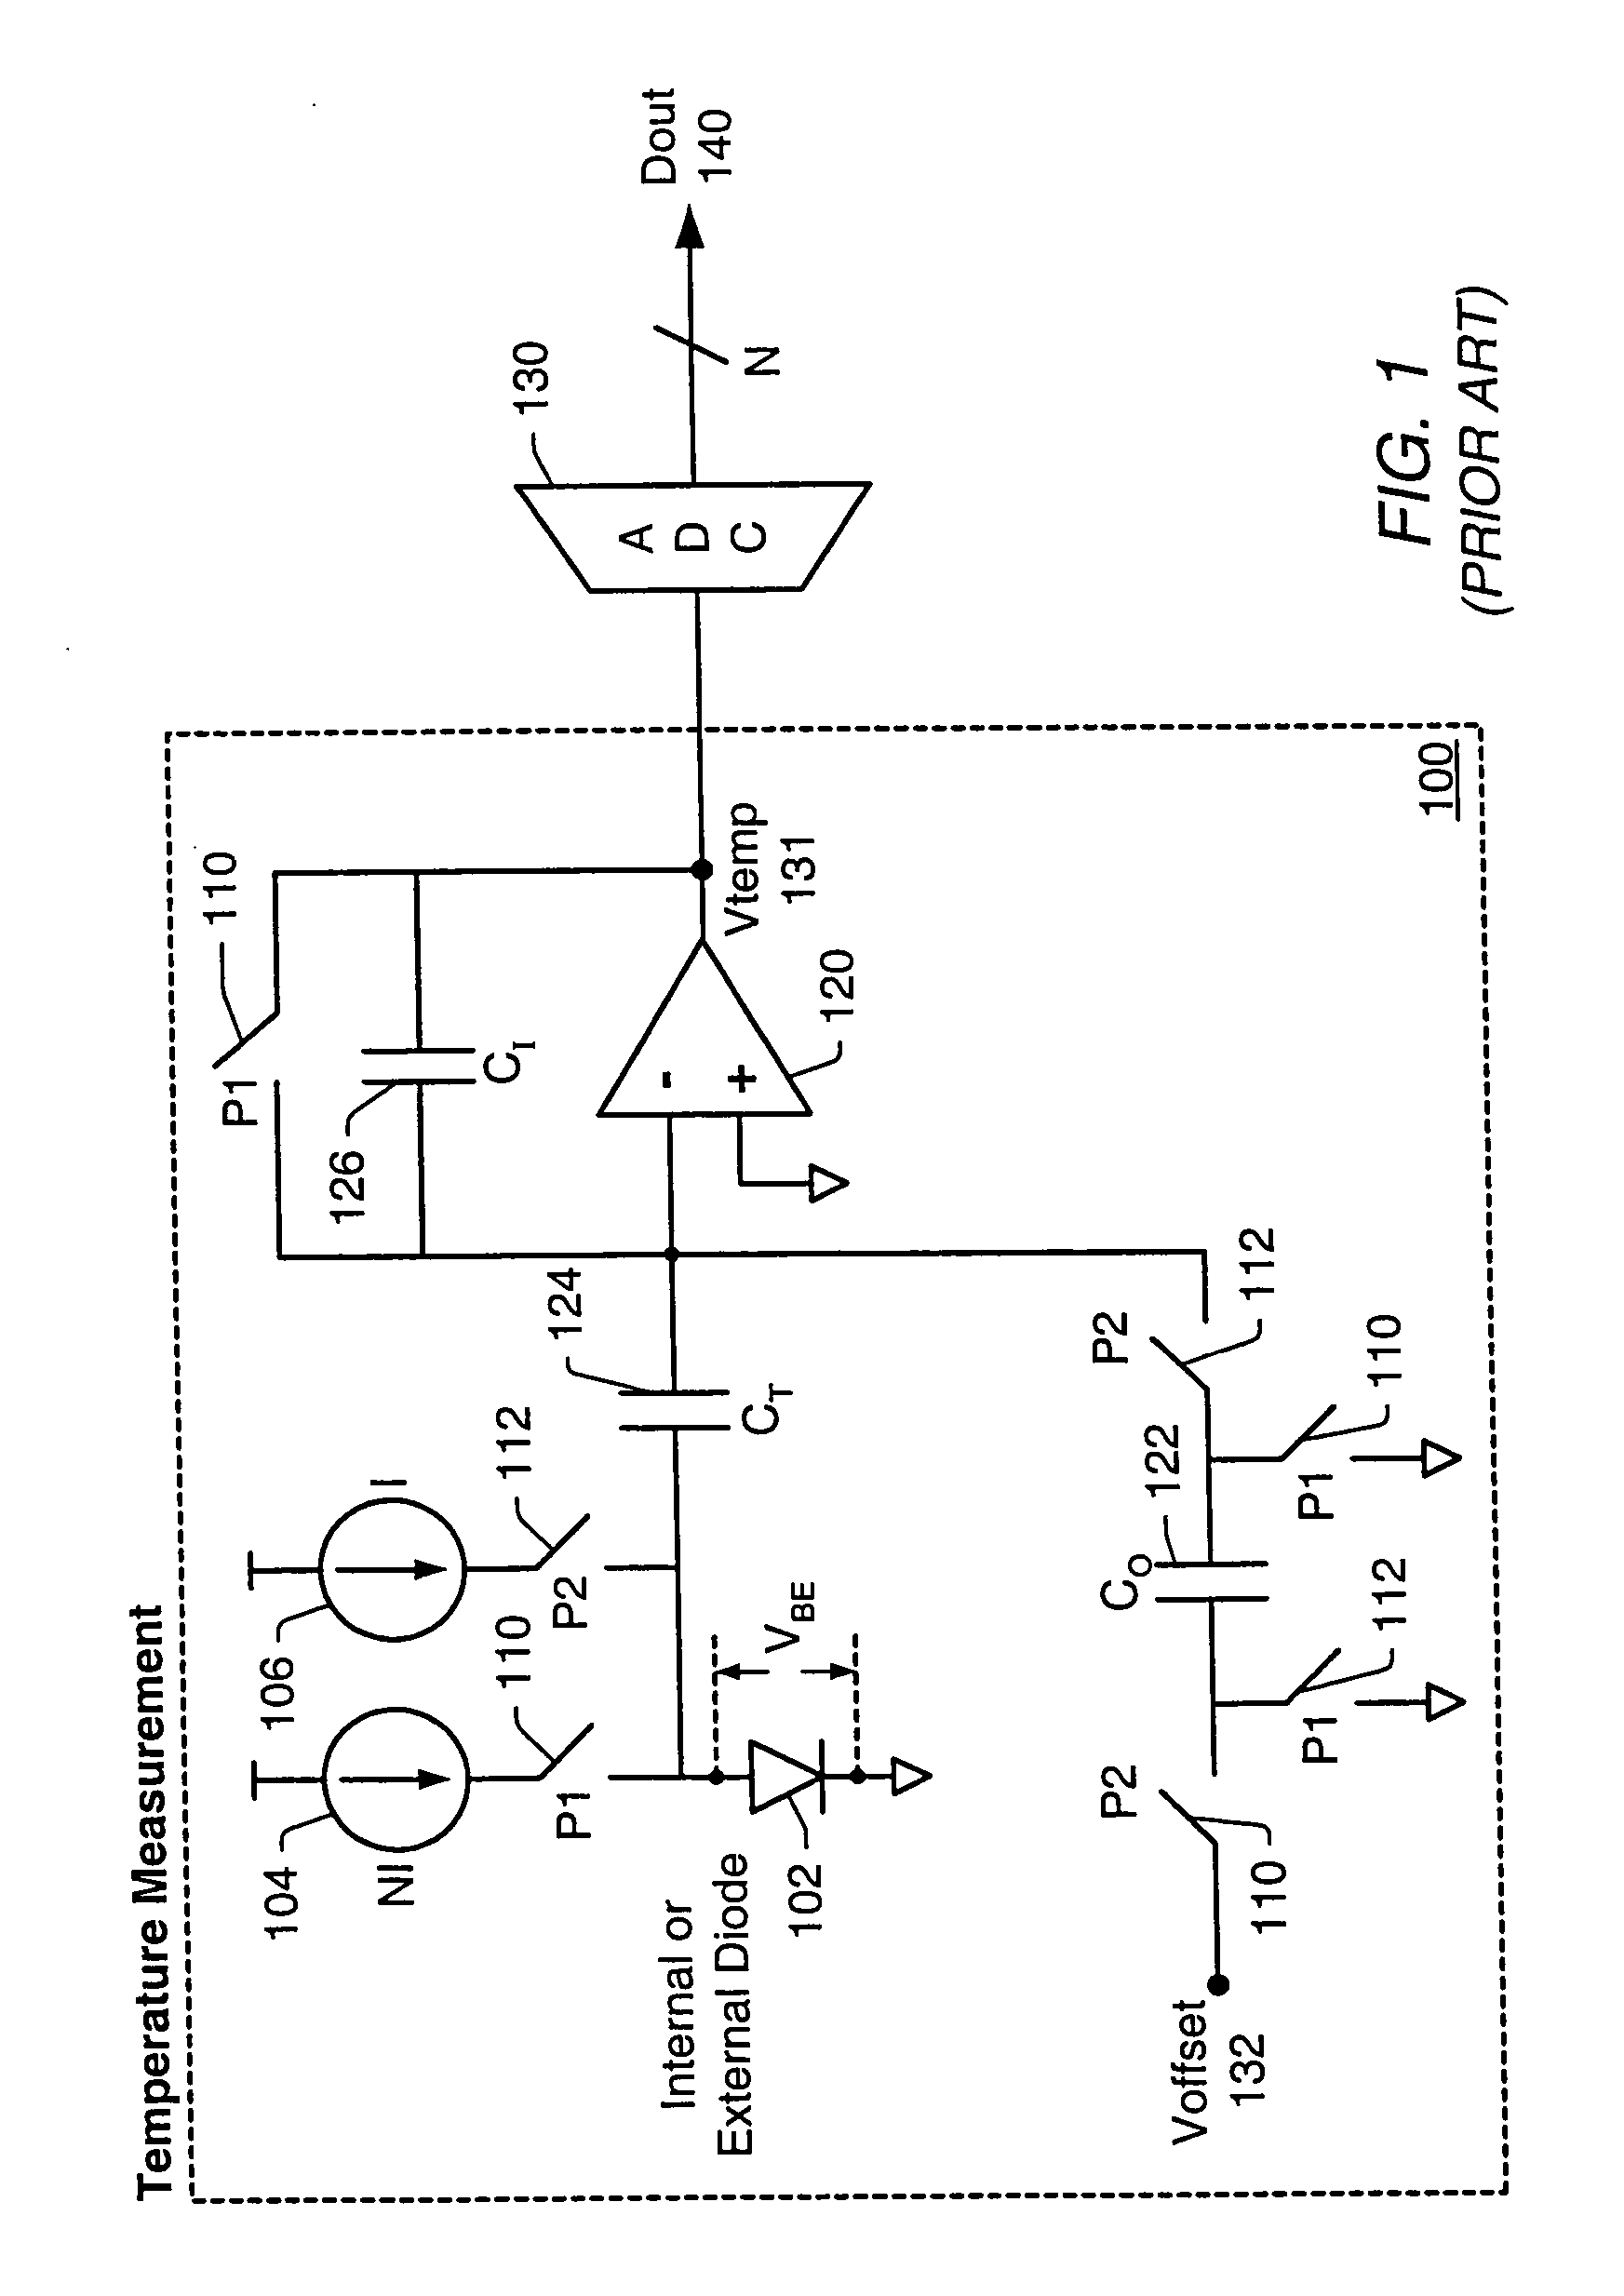 Integrated resistance cancellation in temperature measurement systems